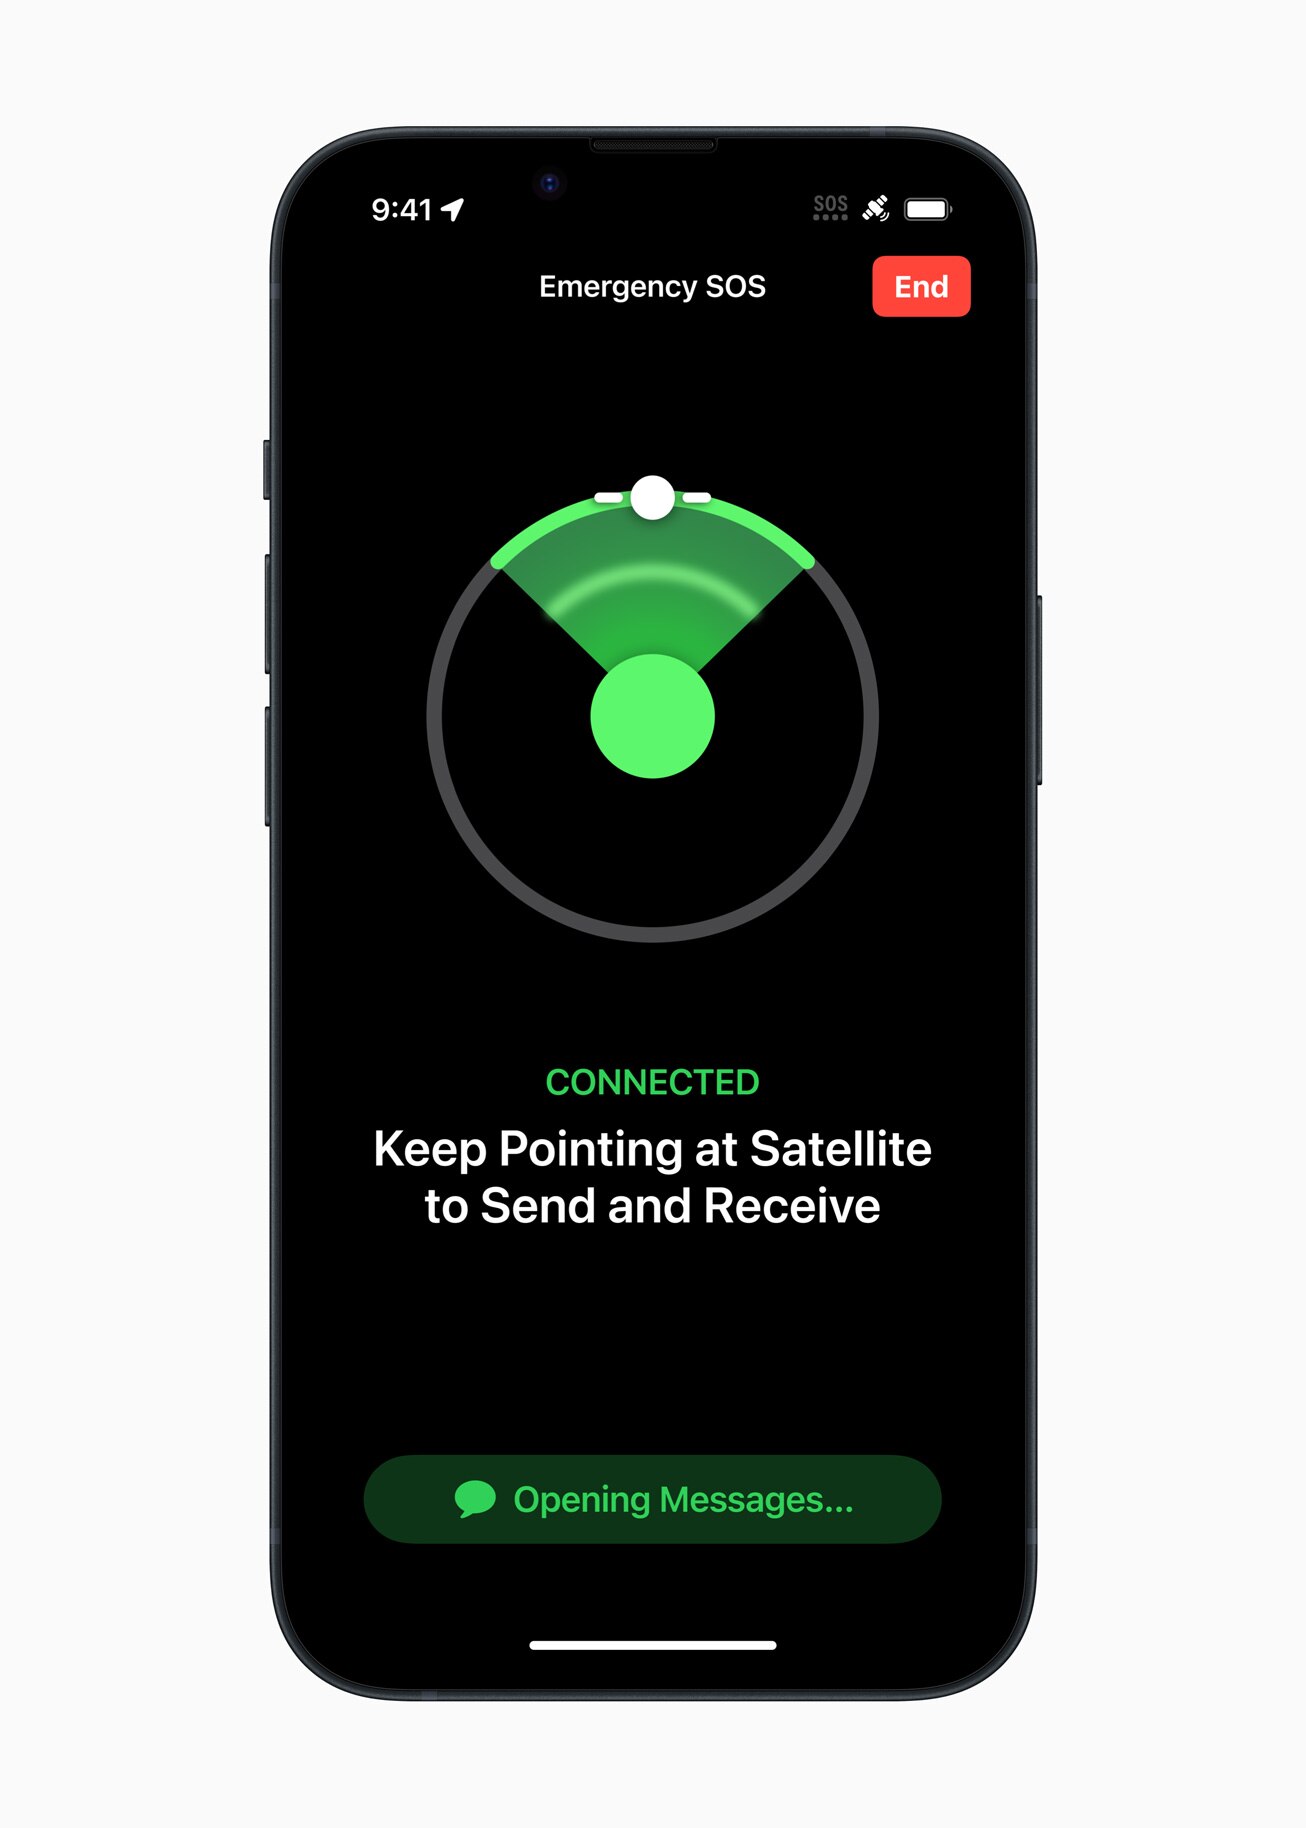 An image of an Apple iPhone displaying an emergency SOS phone call, with prompts for users to point the phone at a satellite